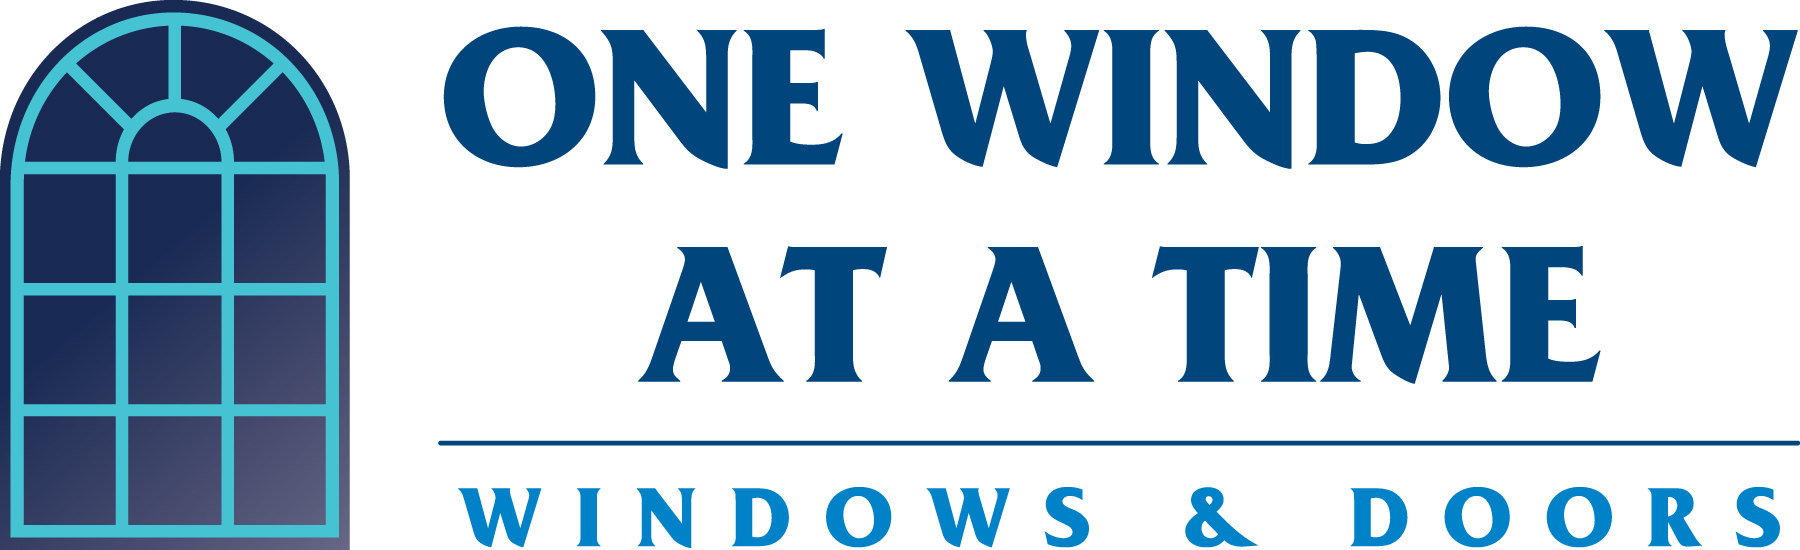 One Window At a Time Logo